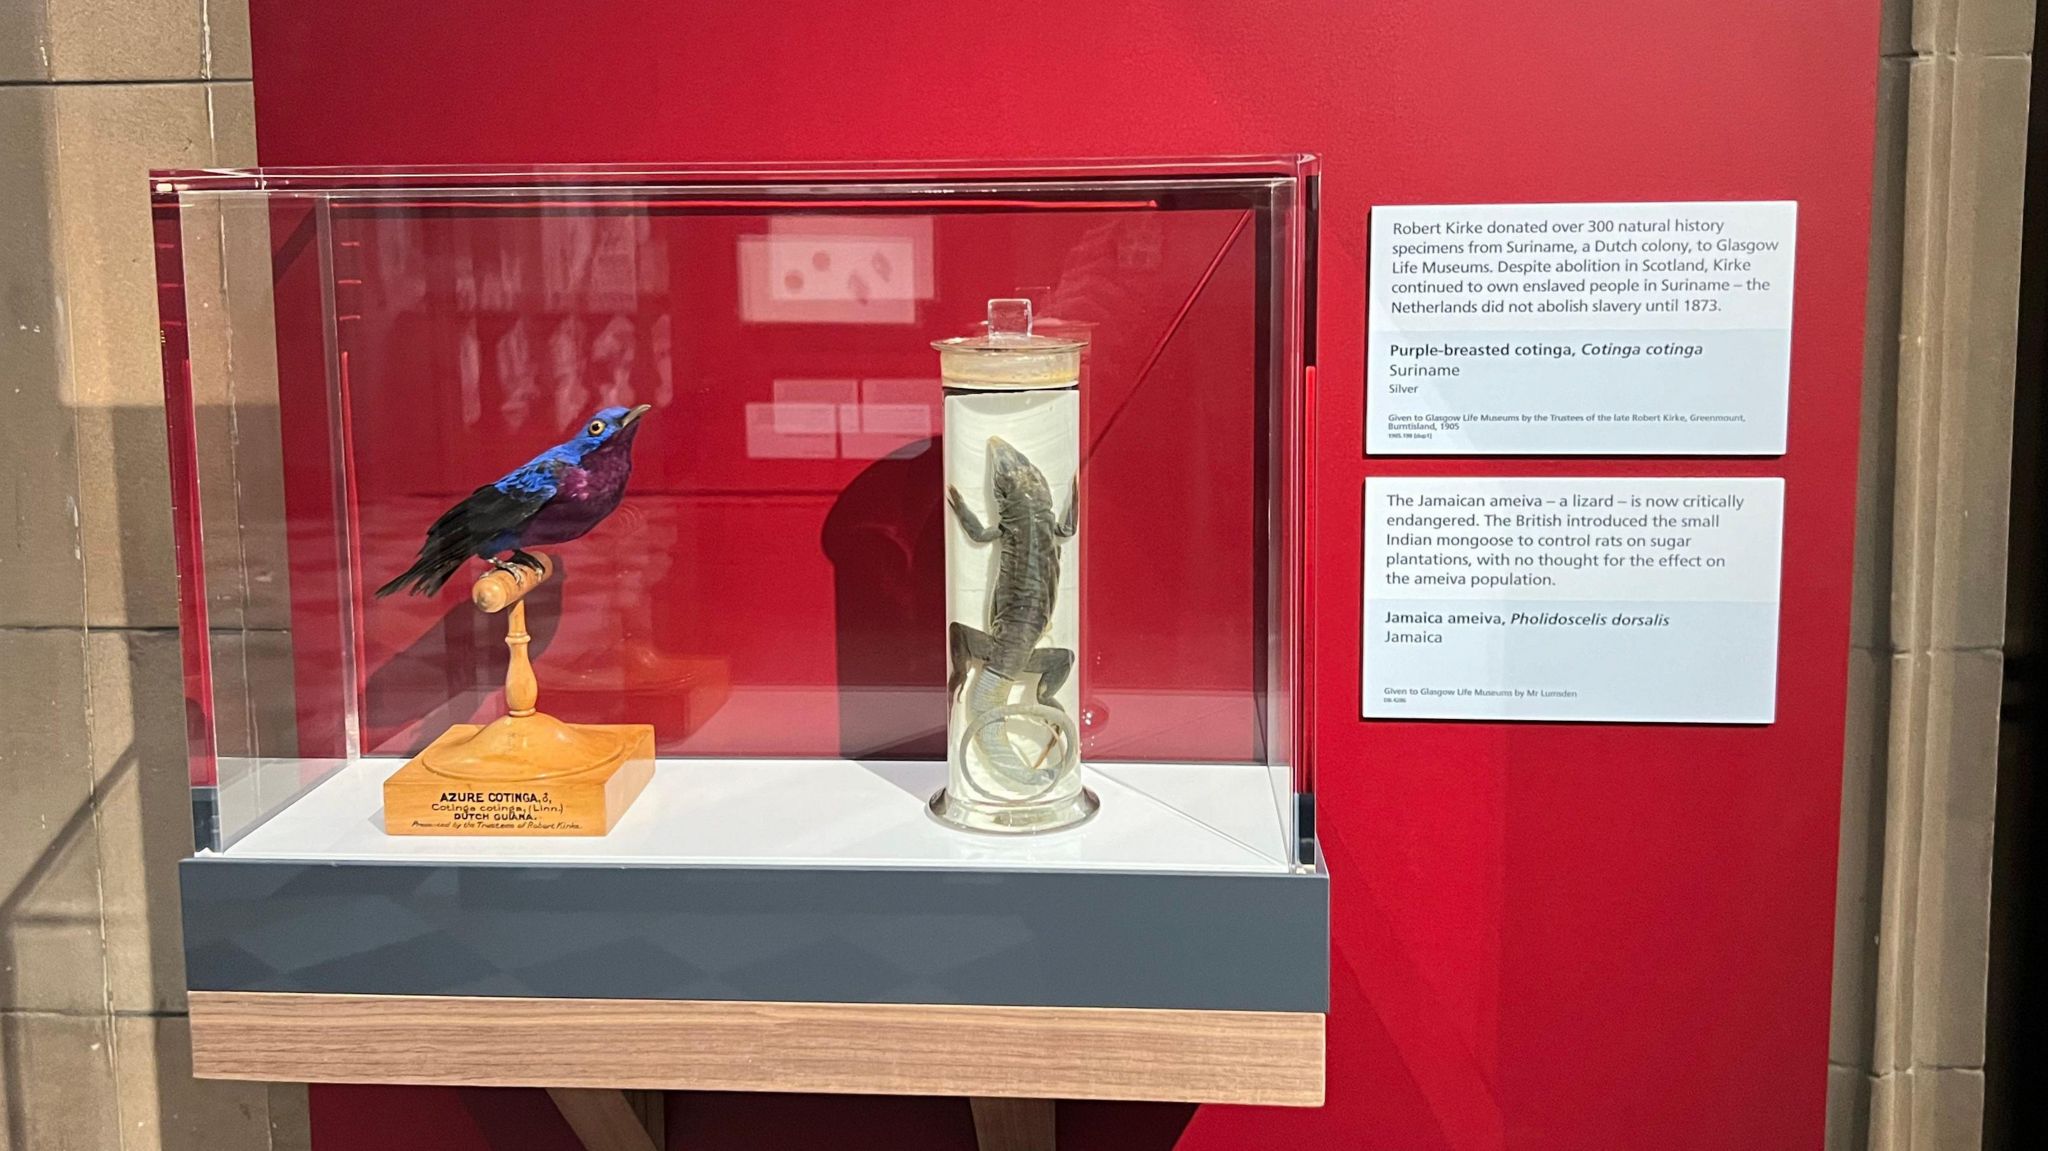 The section on natural history specimens in the exhibition, featuring a bird and Jamaican species of lizard